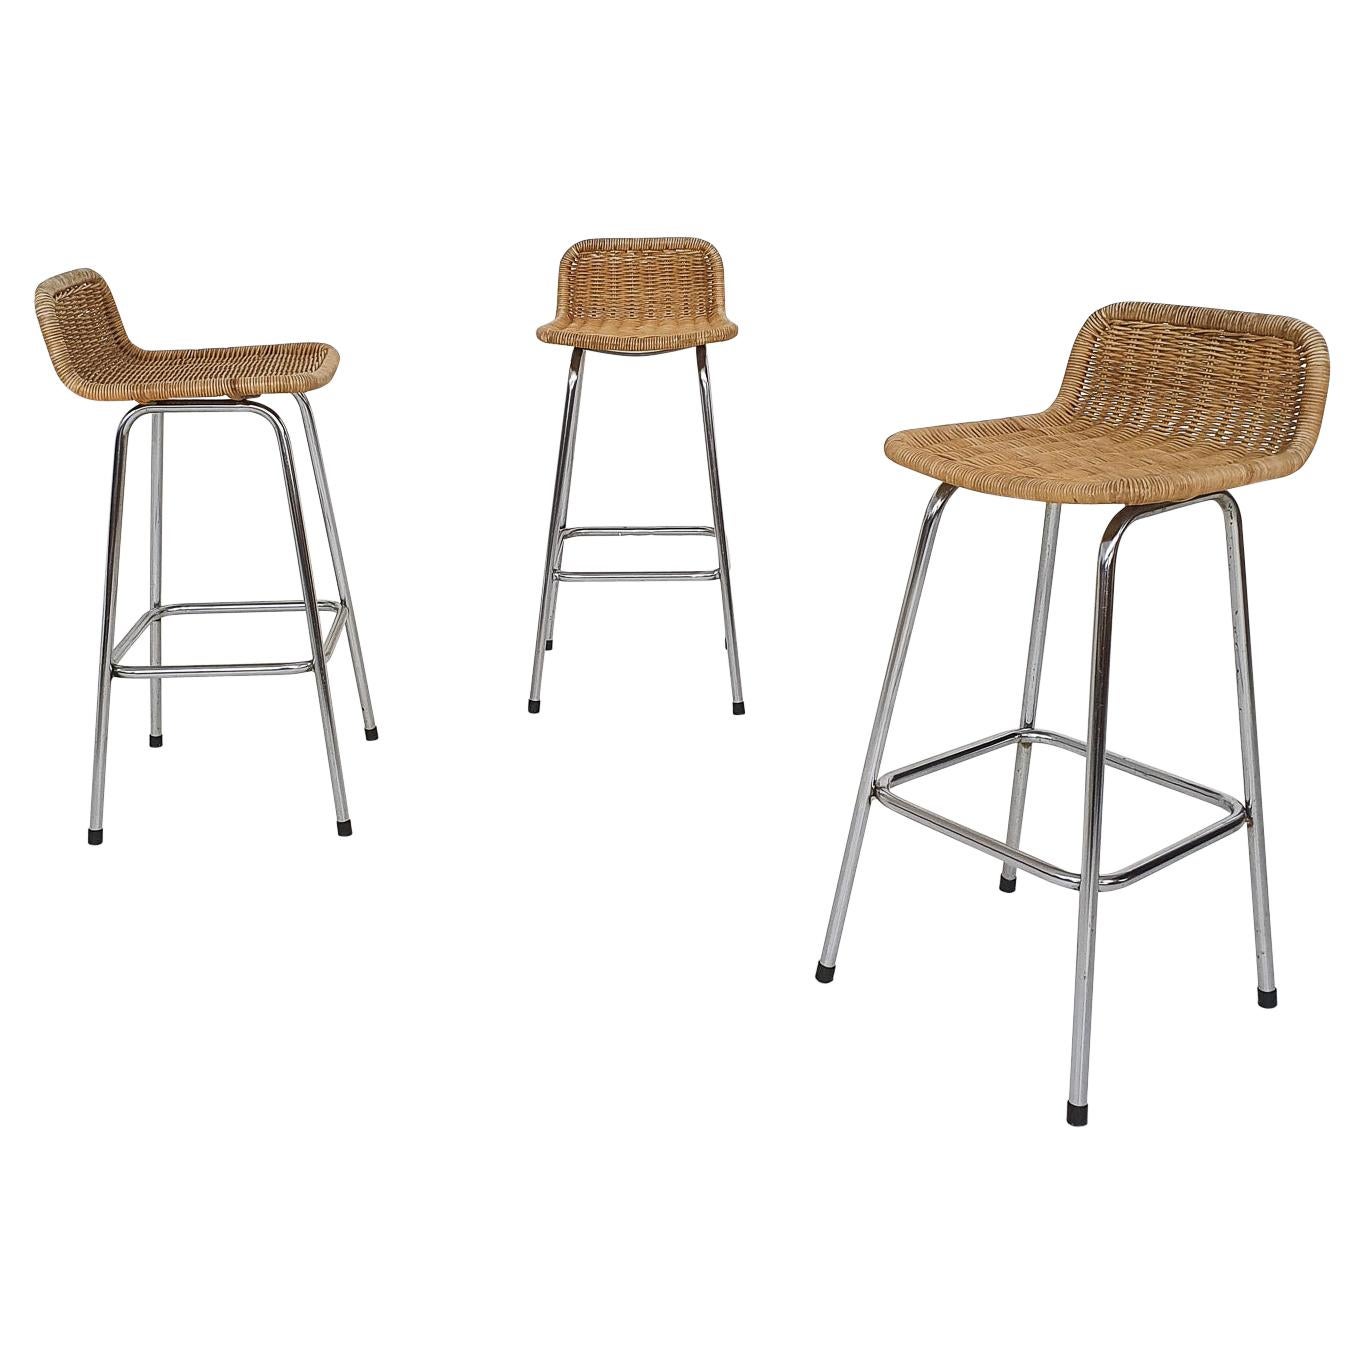 Set of Three Rohe Noordwolde Rattan and Metal Bar Stools, the Netherlands 1950's